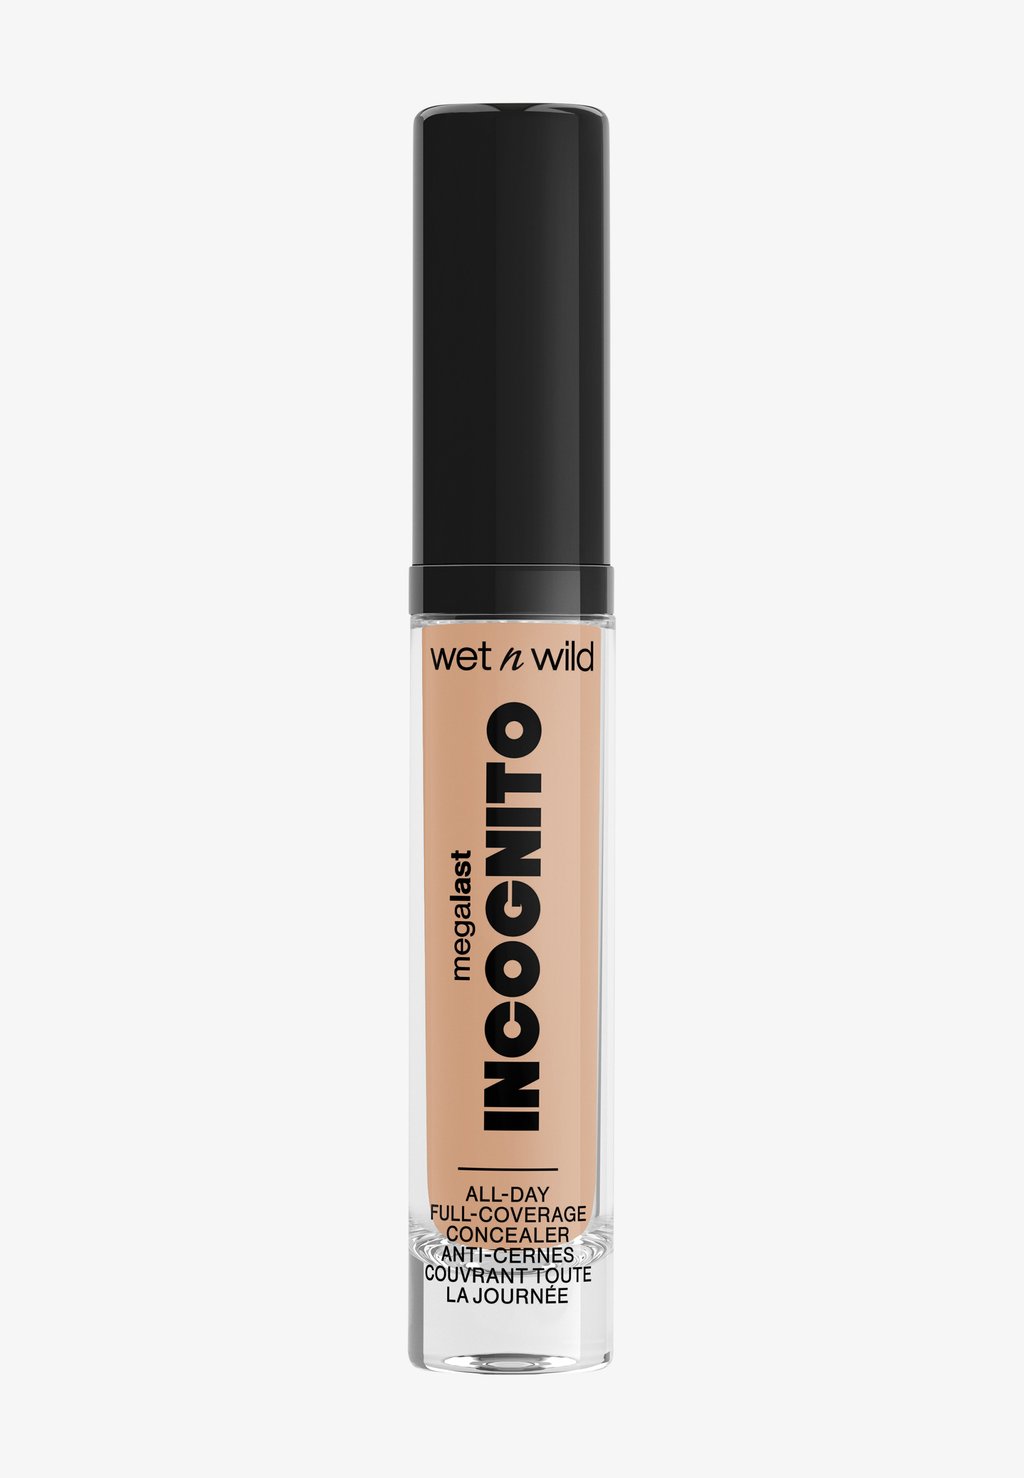 Консилер Megalast Incognito All-Day Full Coverage Concealer WET N WILD, цвет medium neutral фотографии